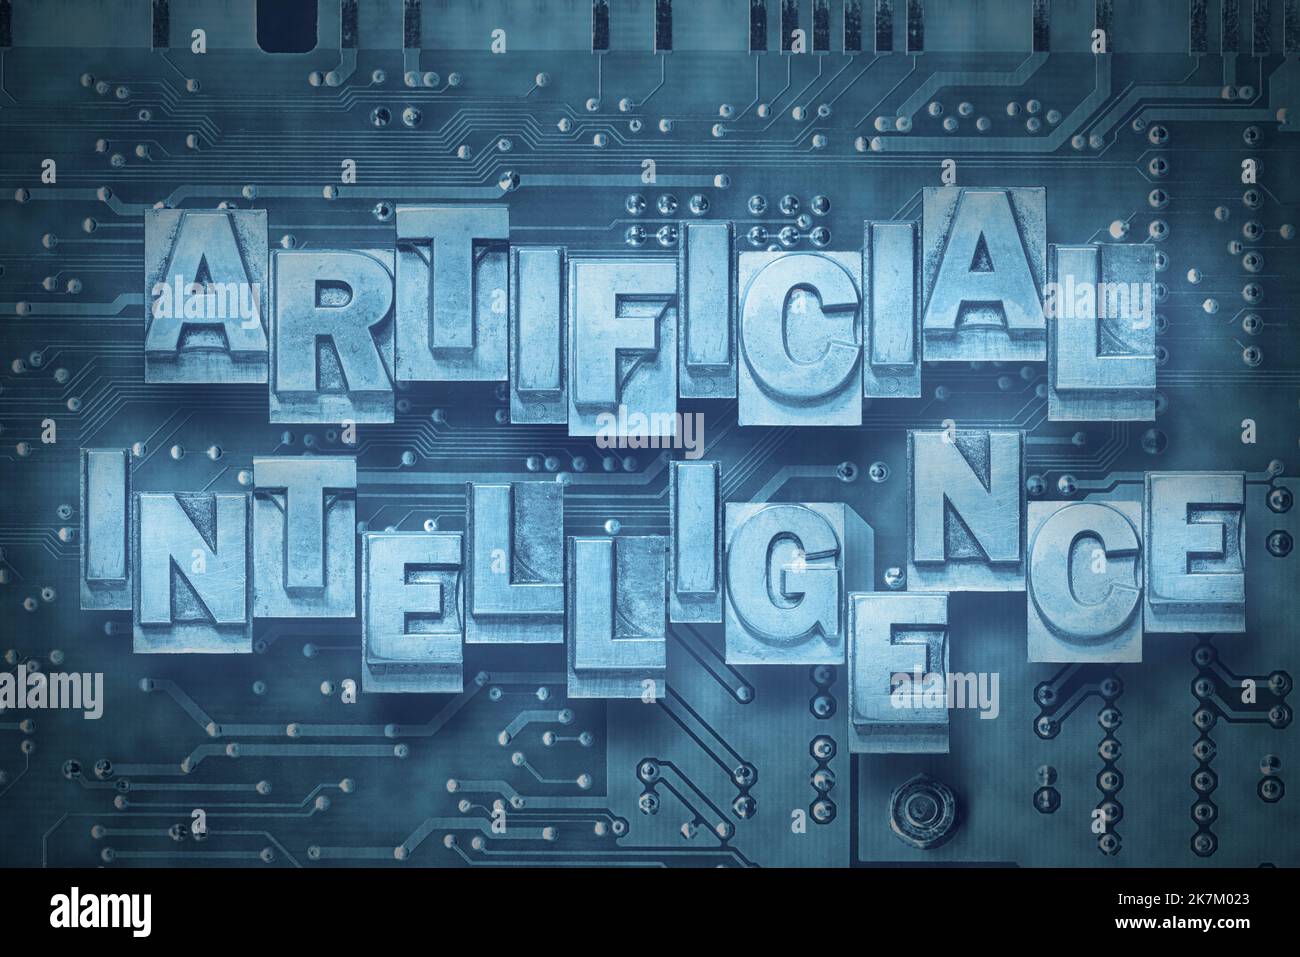 artificial intelligence phrase made from metallic letterpress blocks on the pc board background Stock Photo